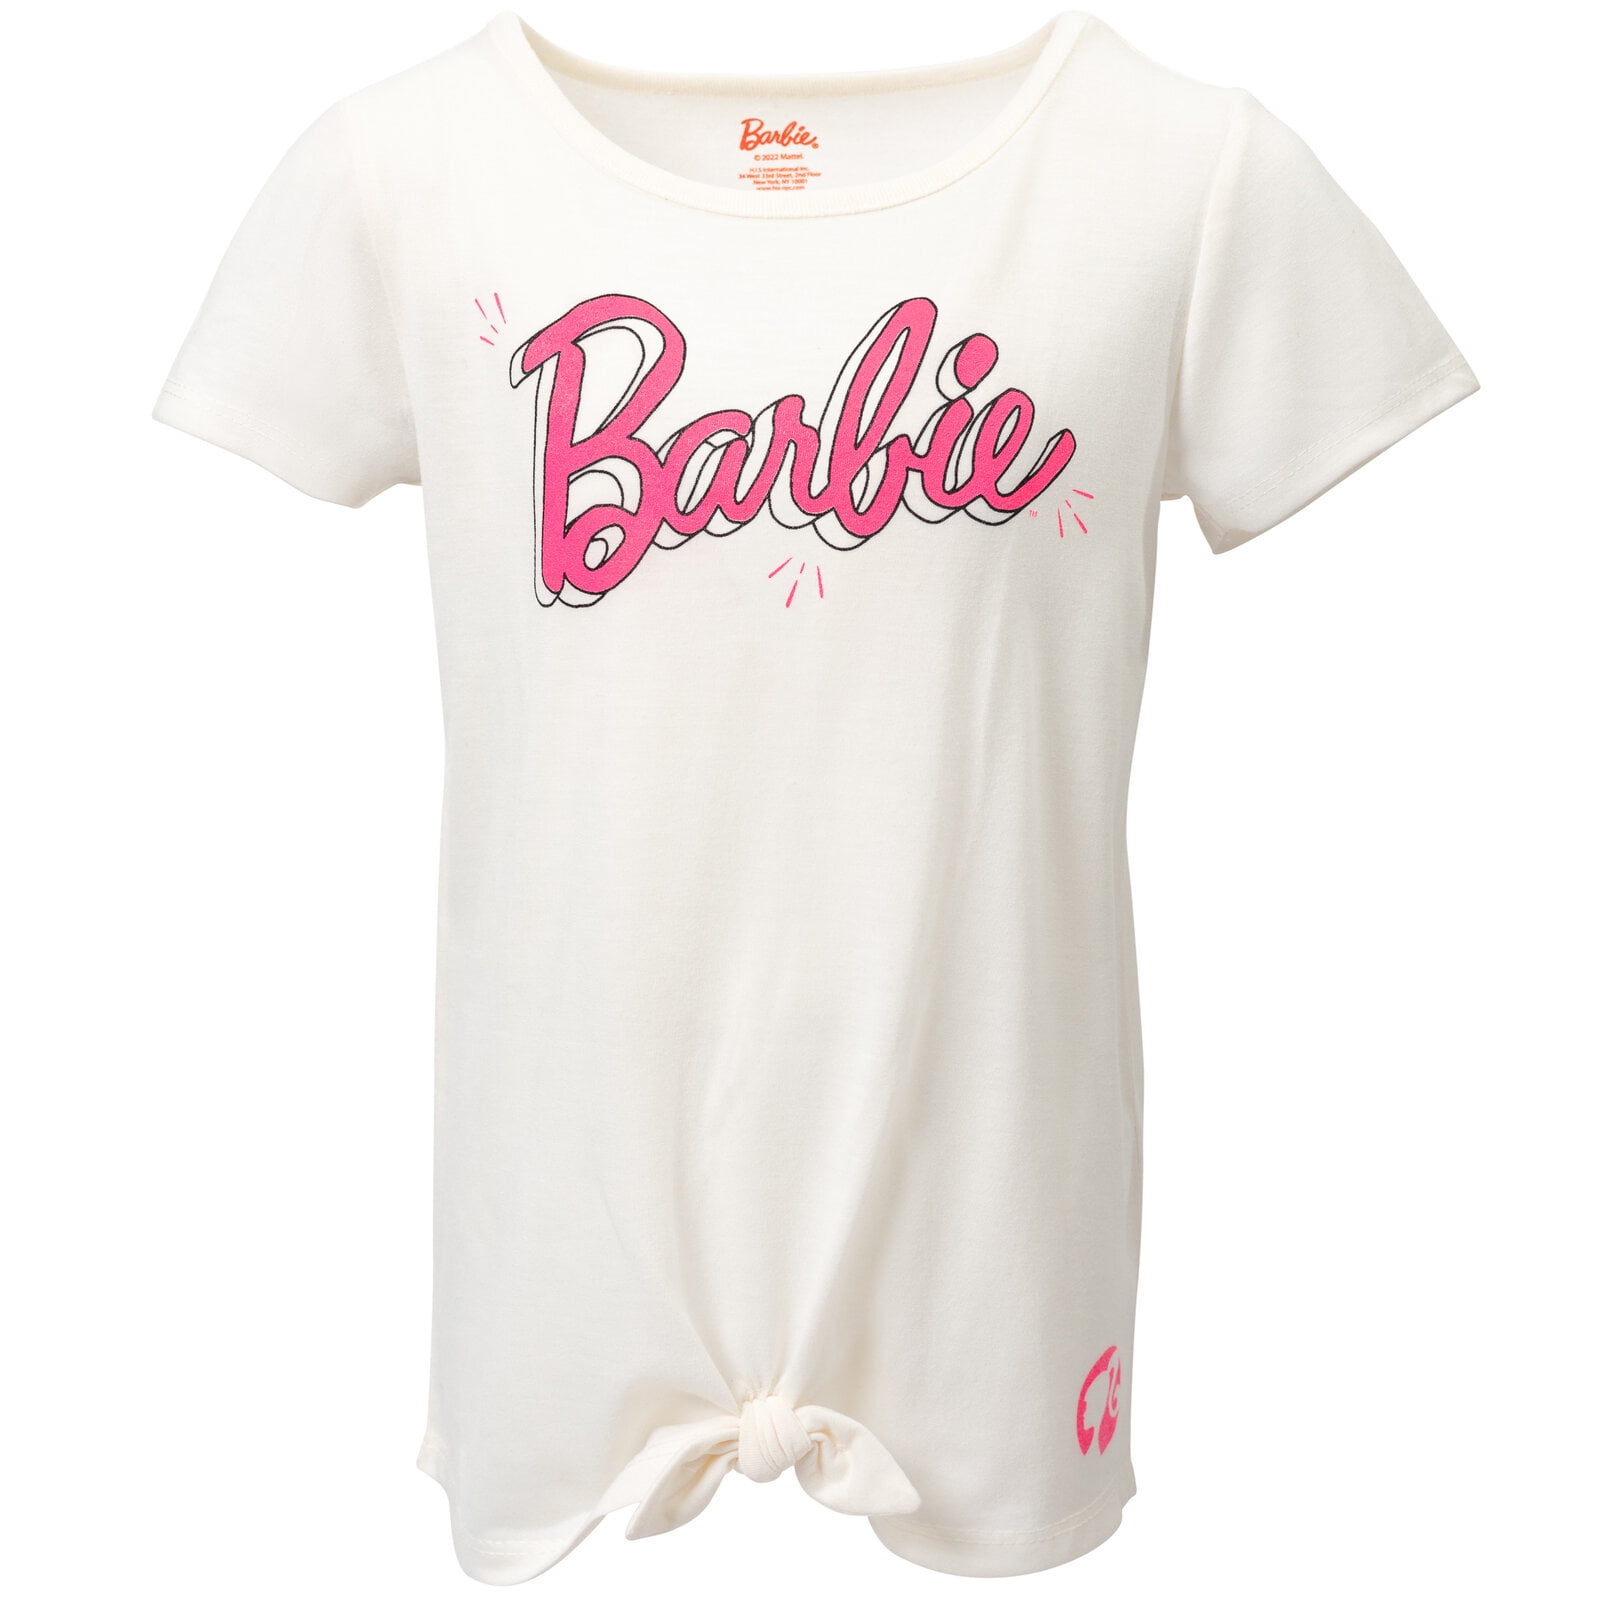 Barbie Big Girls T-Shirt and Shorts Outfit Set Little Kid to Big Kid 